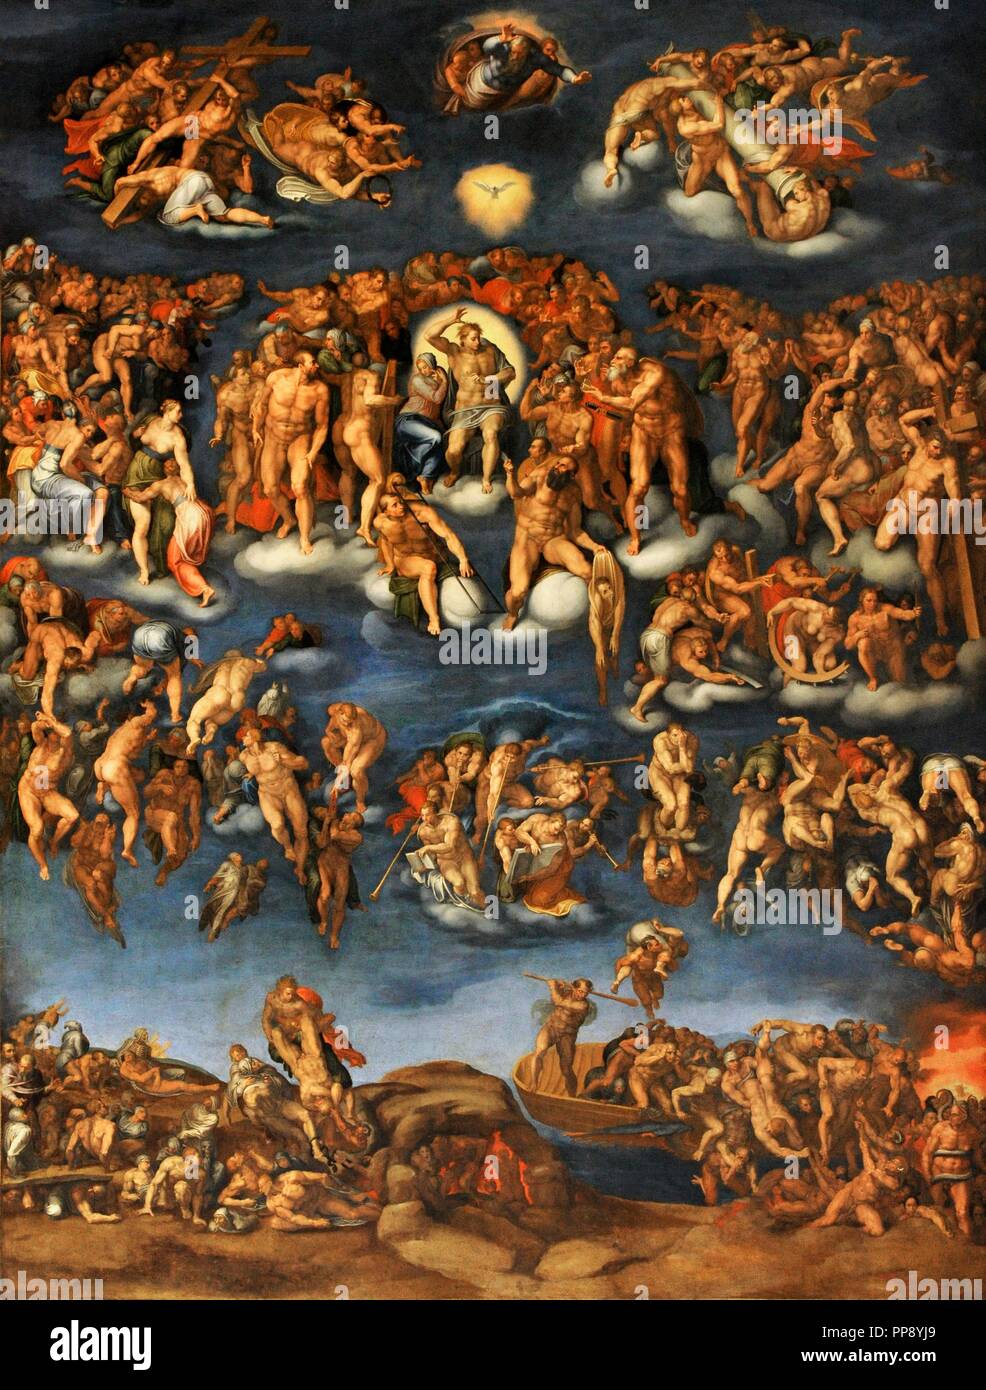 Marcello Venusti (1512/1515-1579). Italian painter. Last Judgement, 1548. Scaled copy after Michelangelo. Farnese Collection. National Museum of Capodimonte. Naples. Italy. Stock Photo